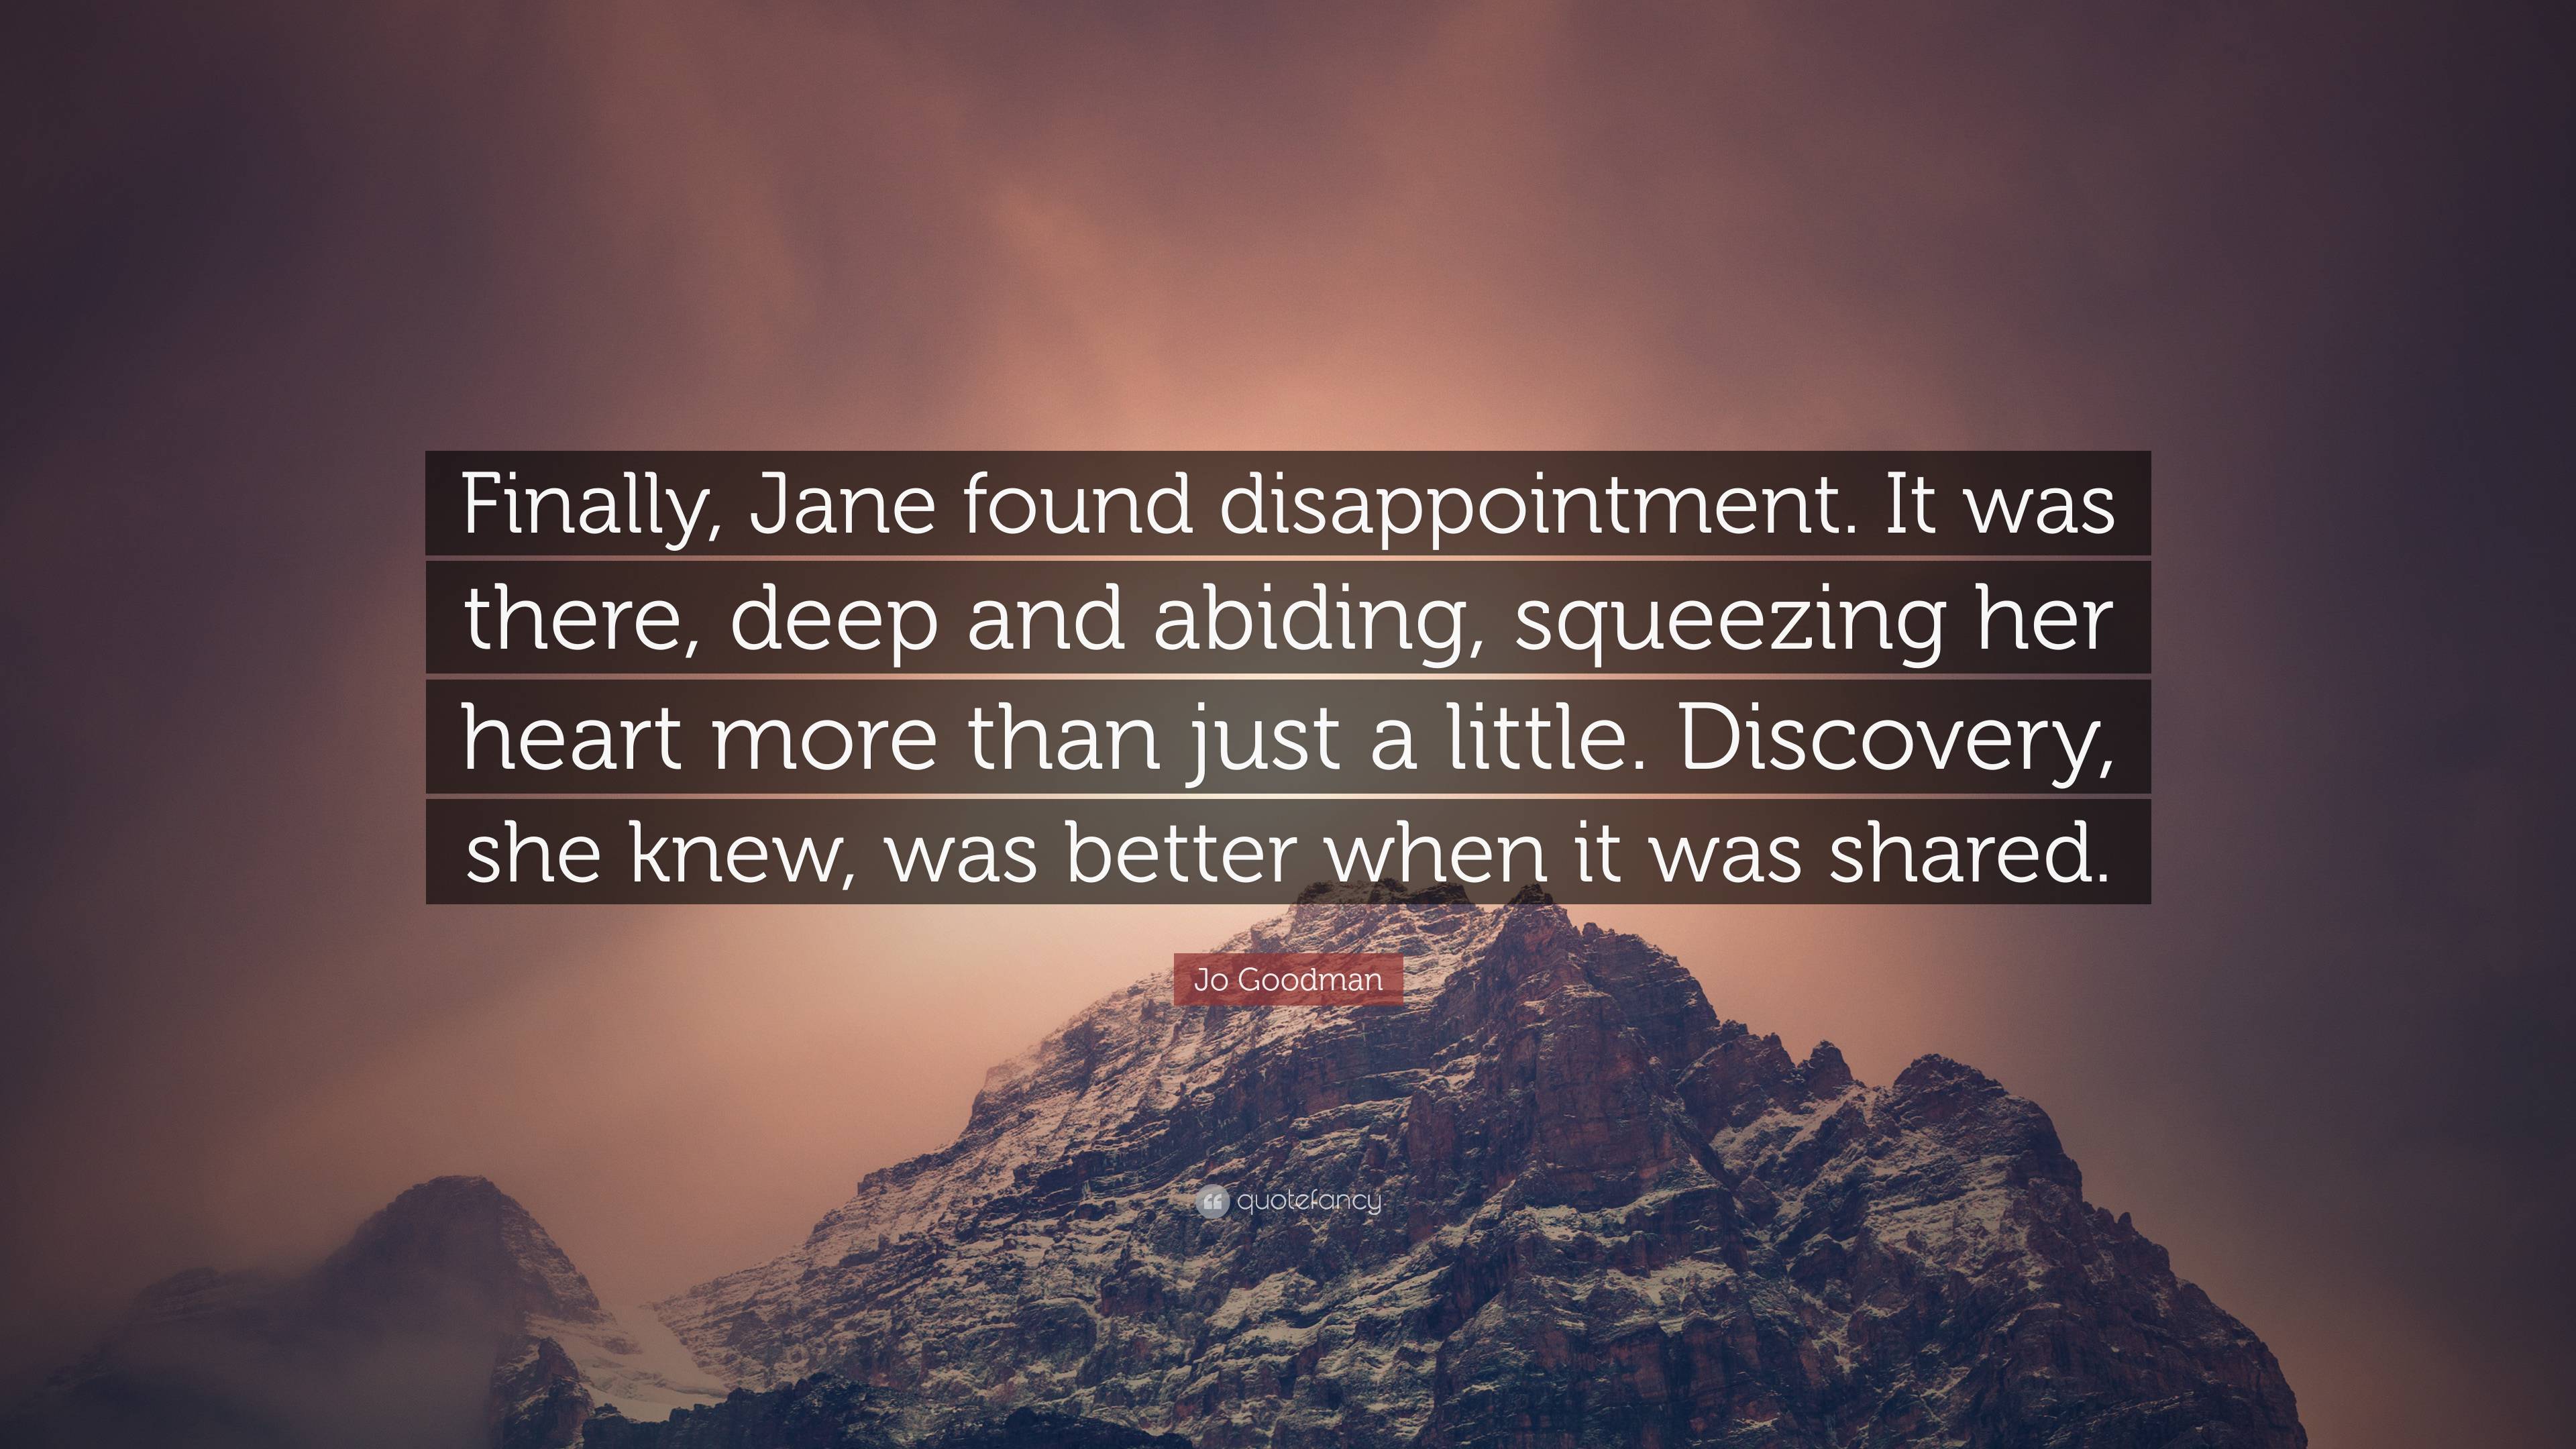 Jo Goodman Quote: “Finally, Jane found disappointment. It was there, deep  and abiding, squeezing her heart more than just a little. Discove”